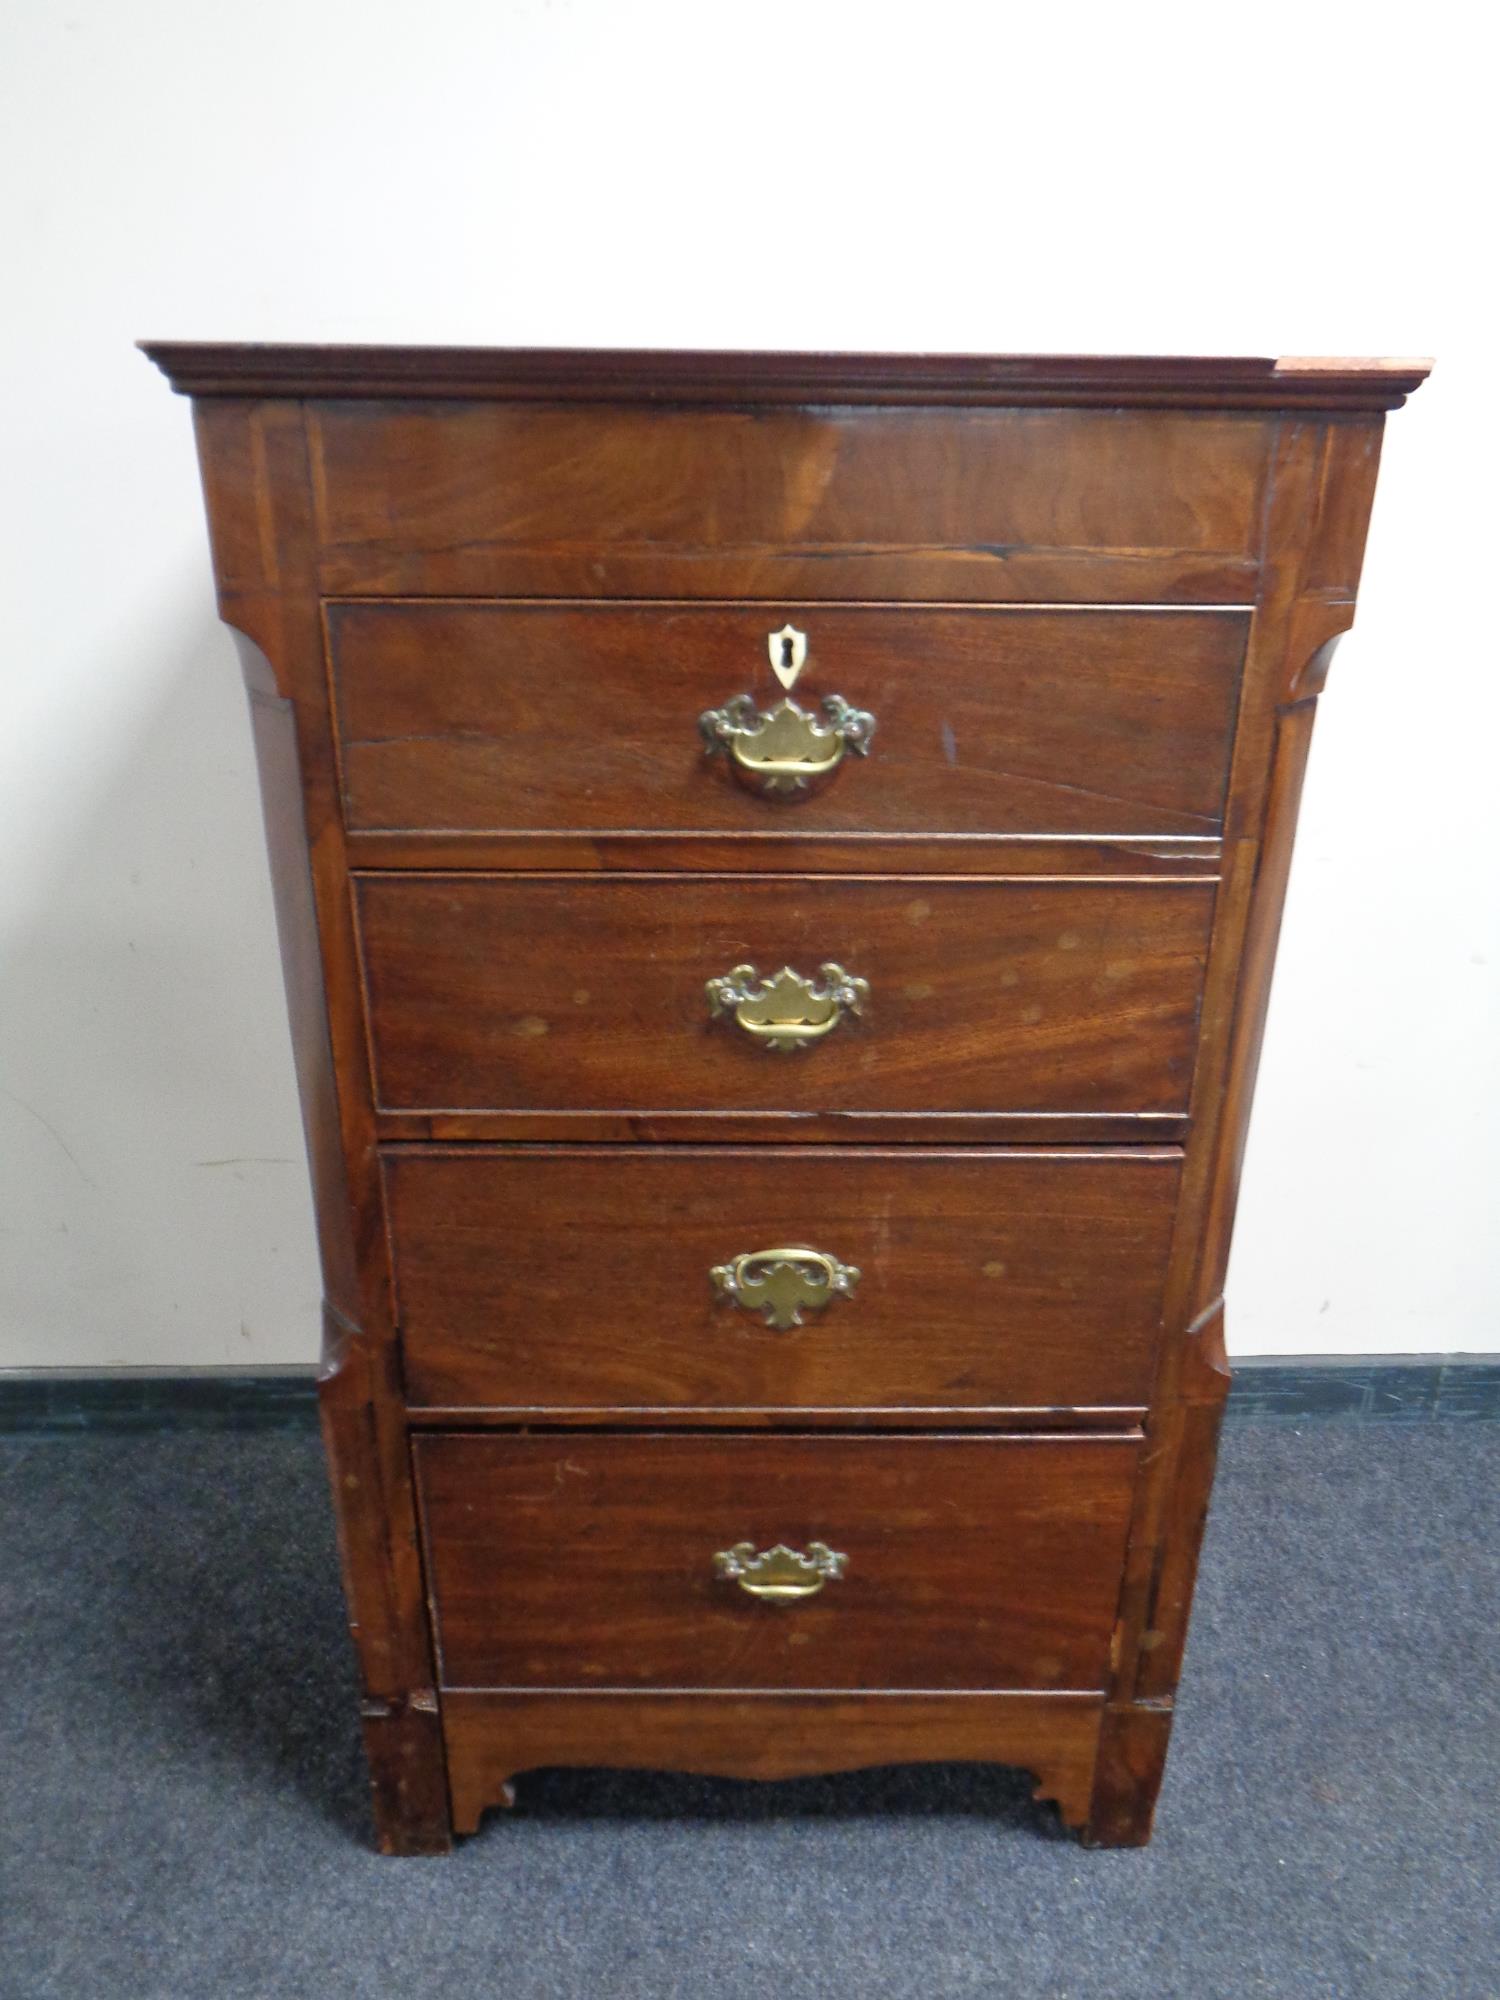 A 19th century mahogany four drawer chest with brass drop handles